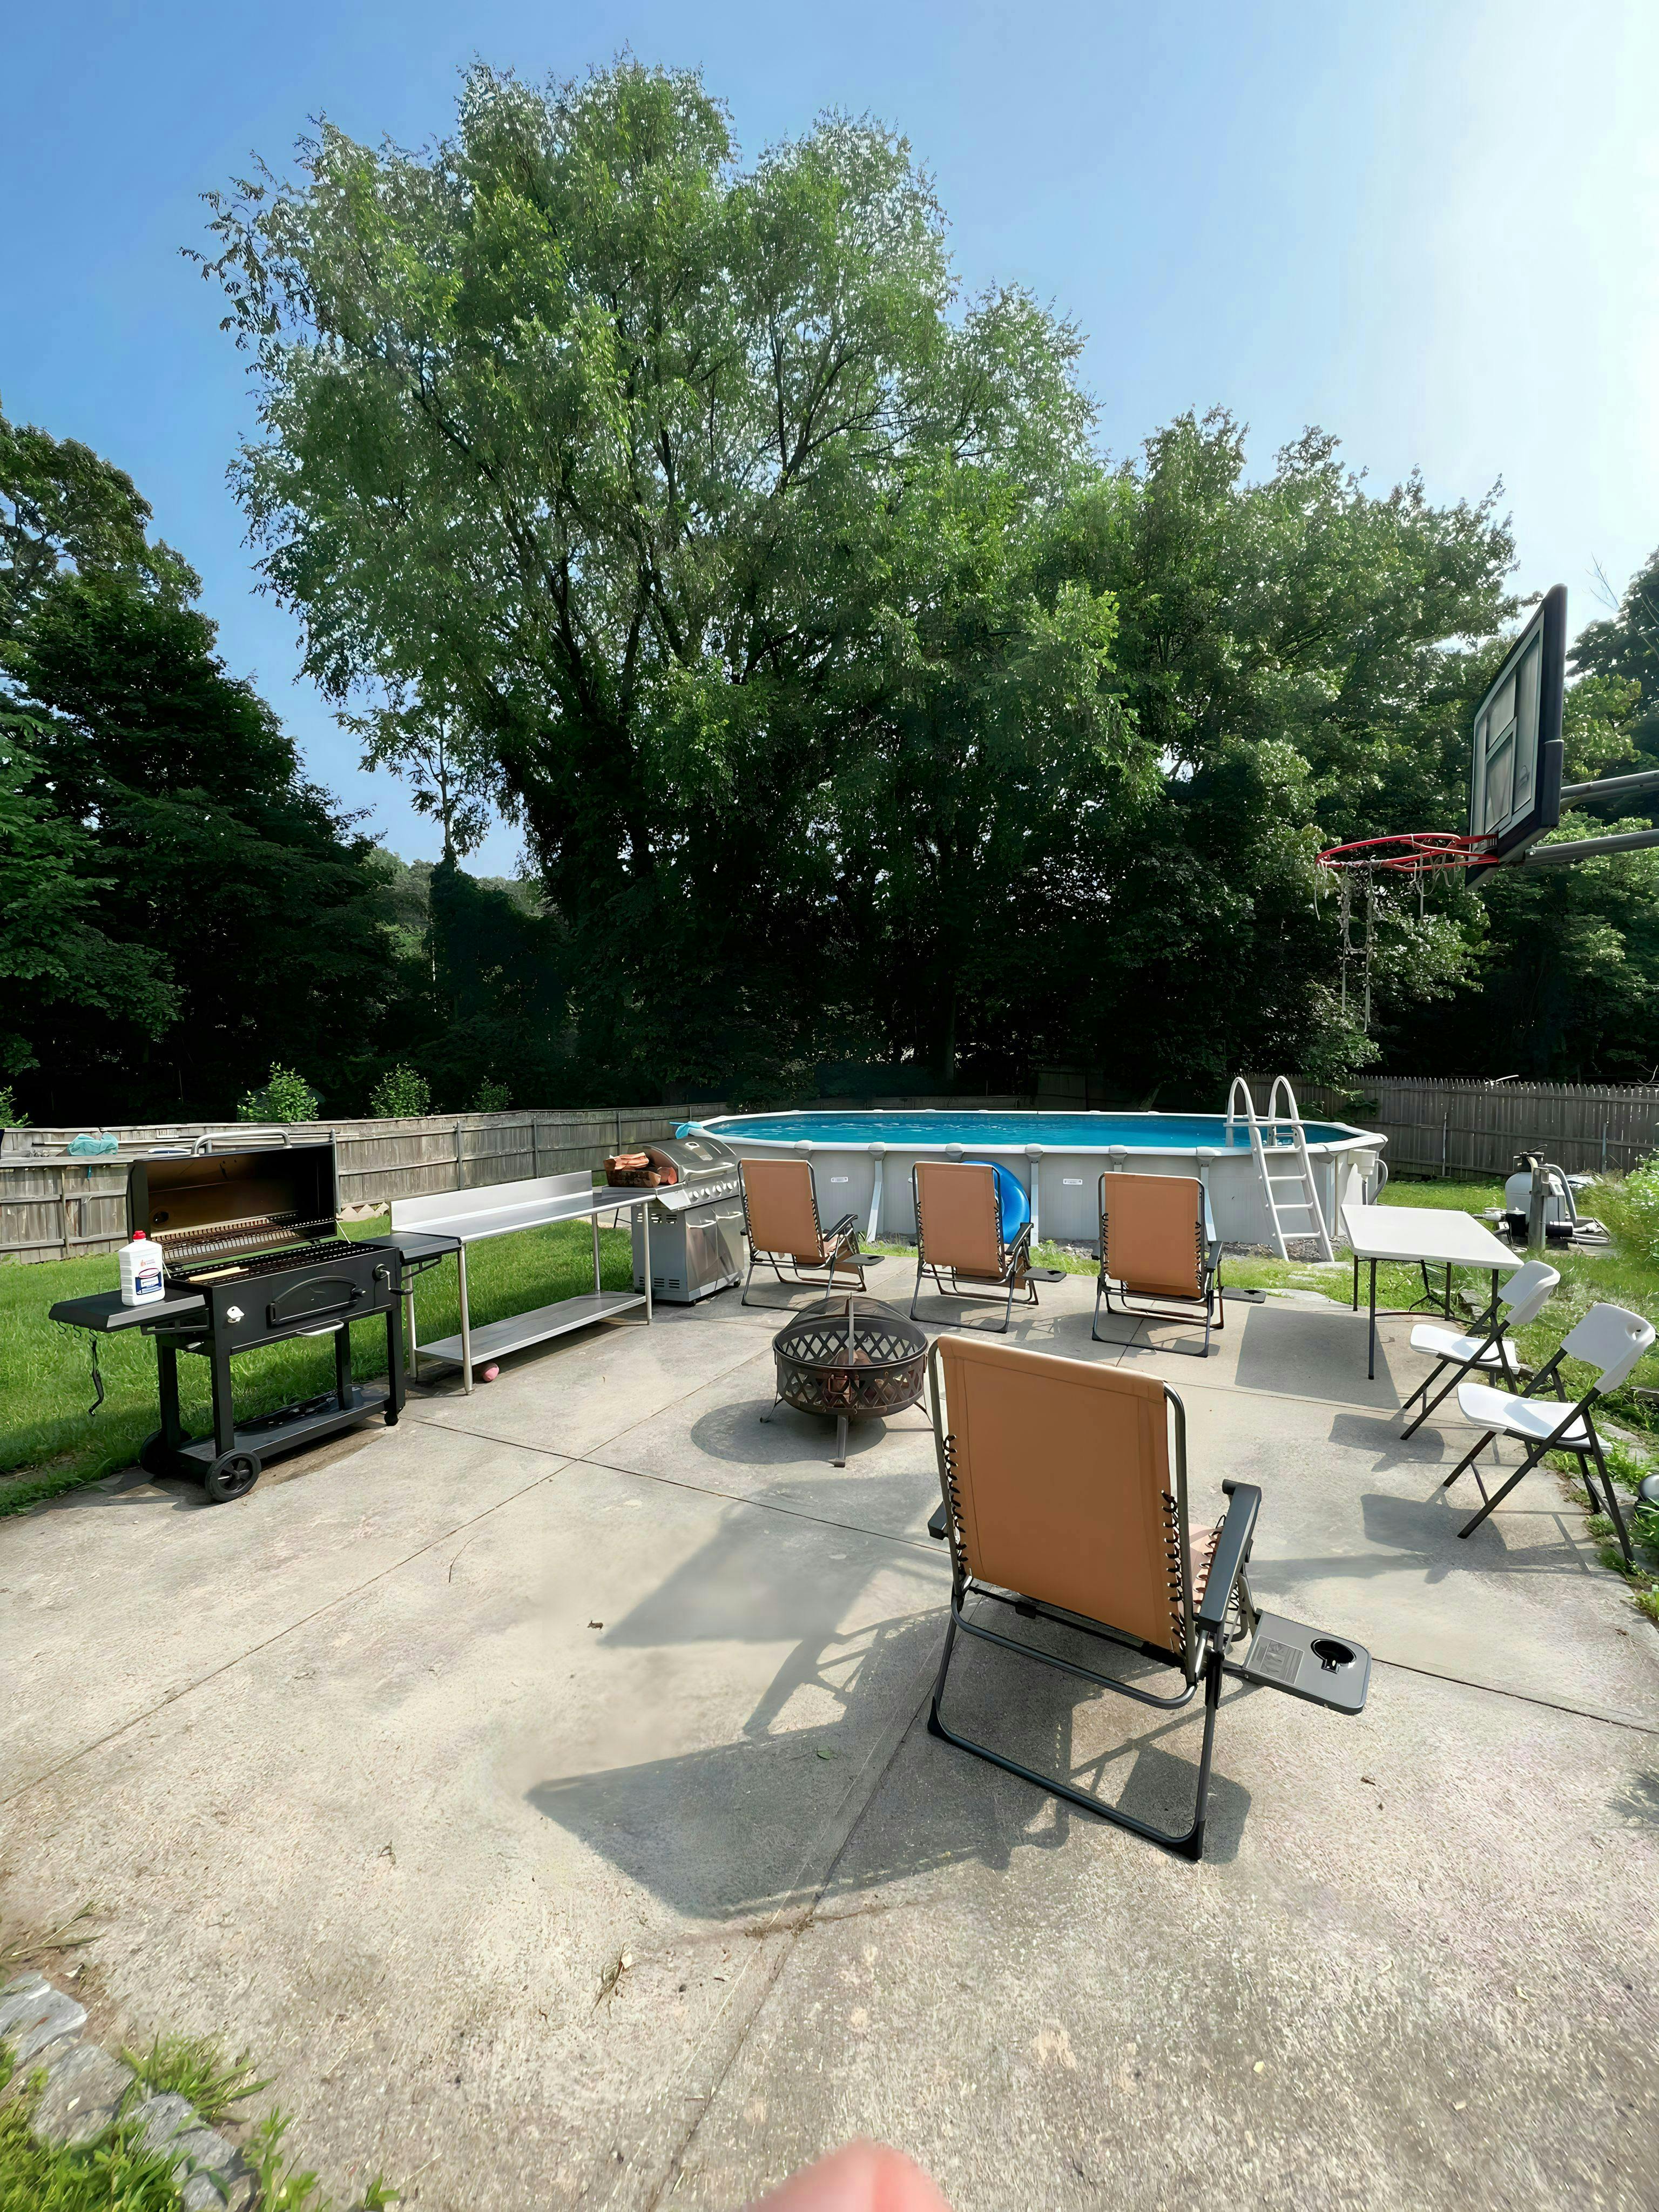 Large area with overground pool